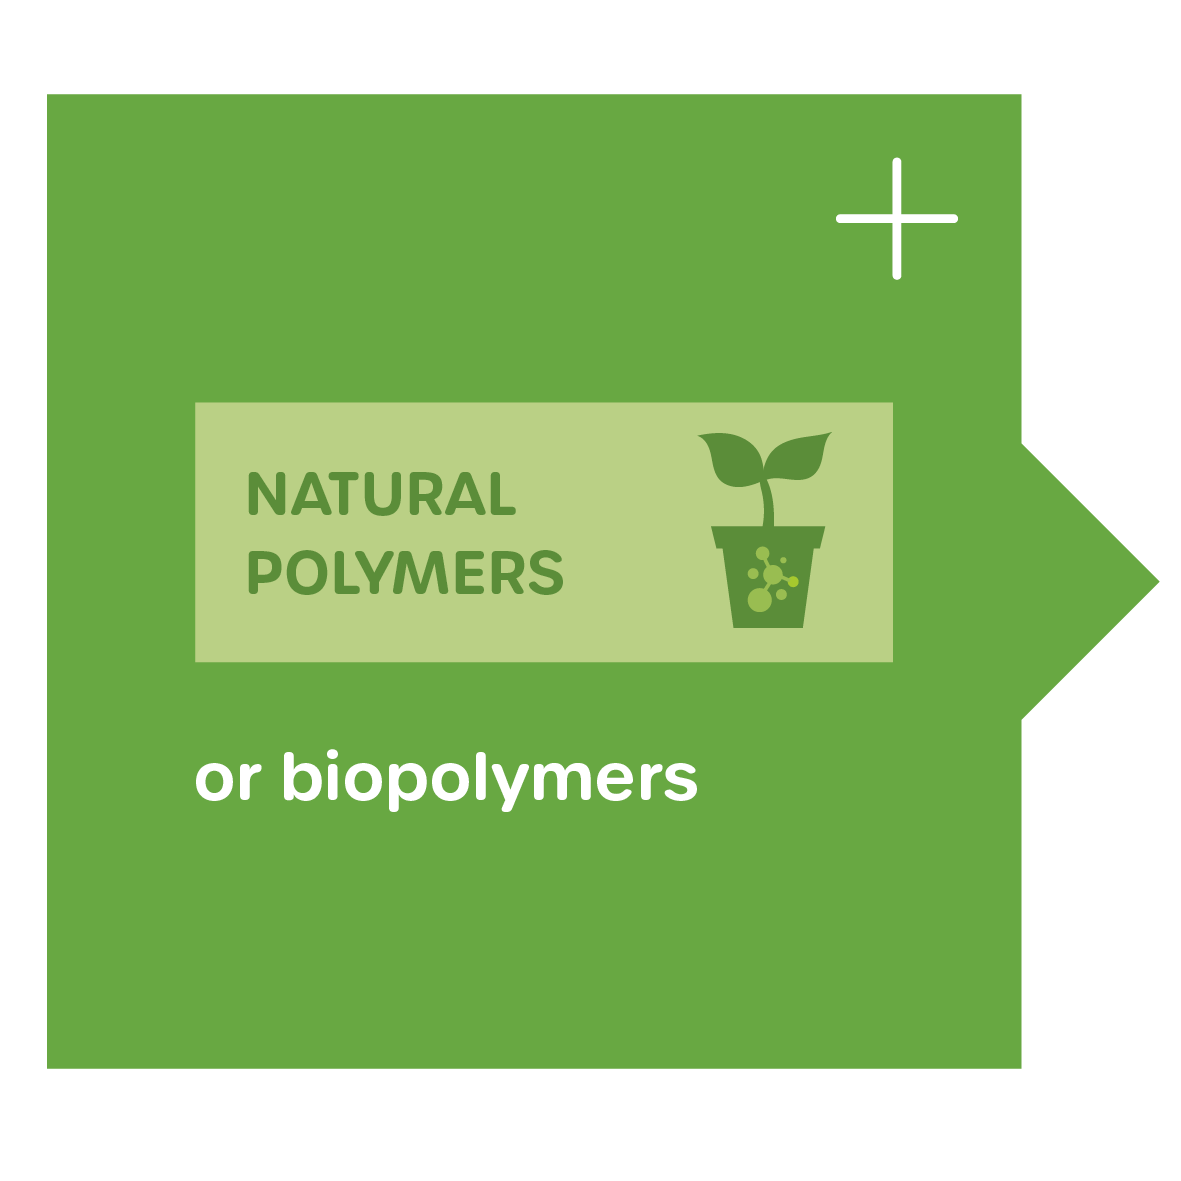 Biopolymers - natural polymers